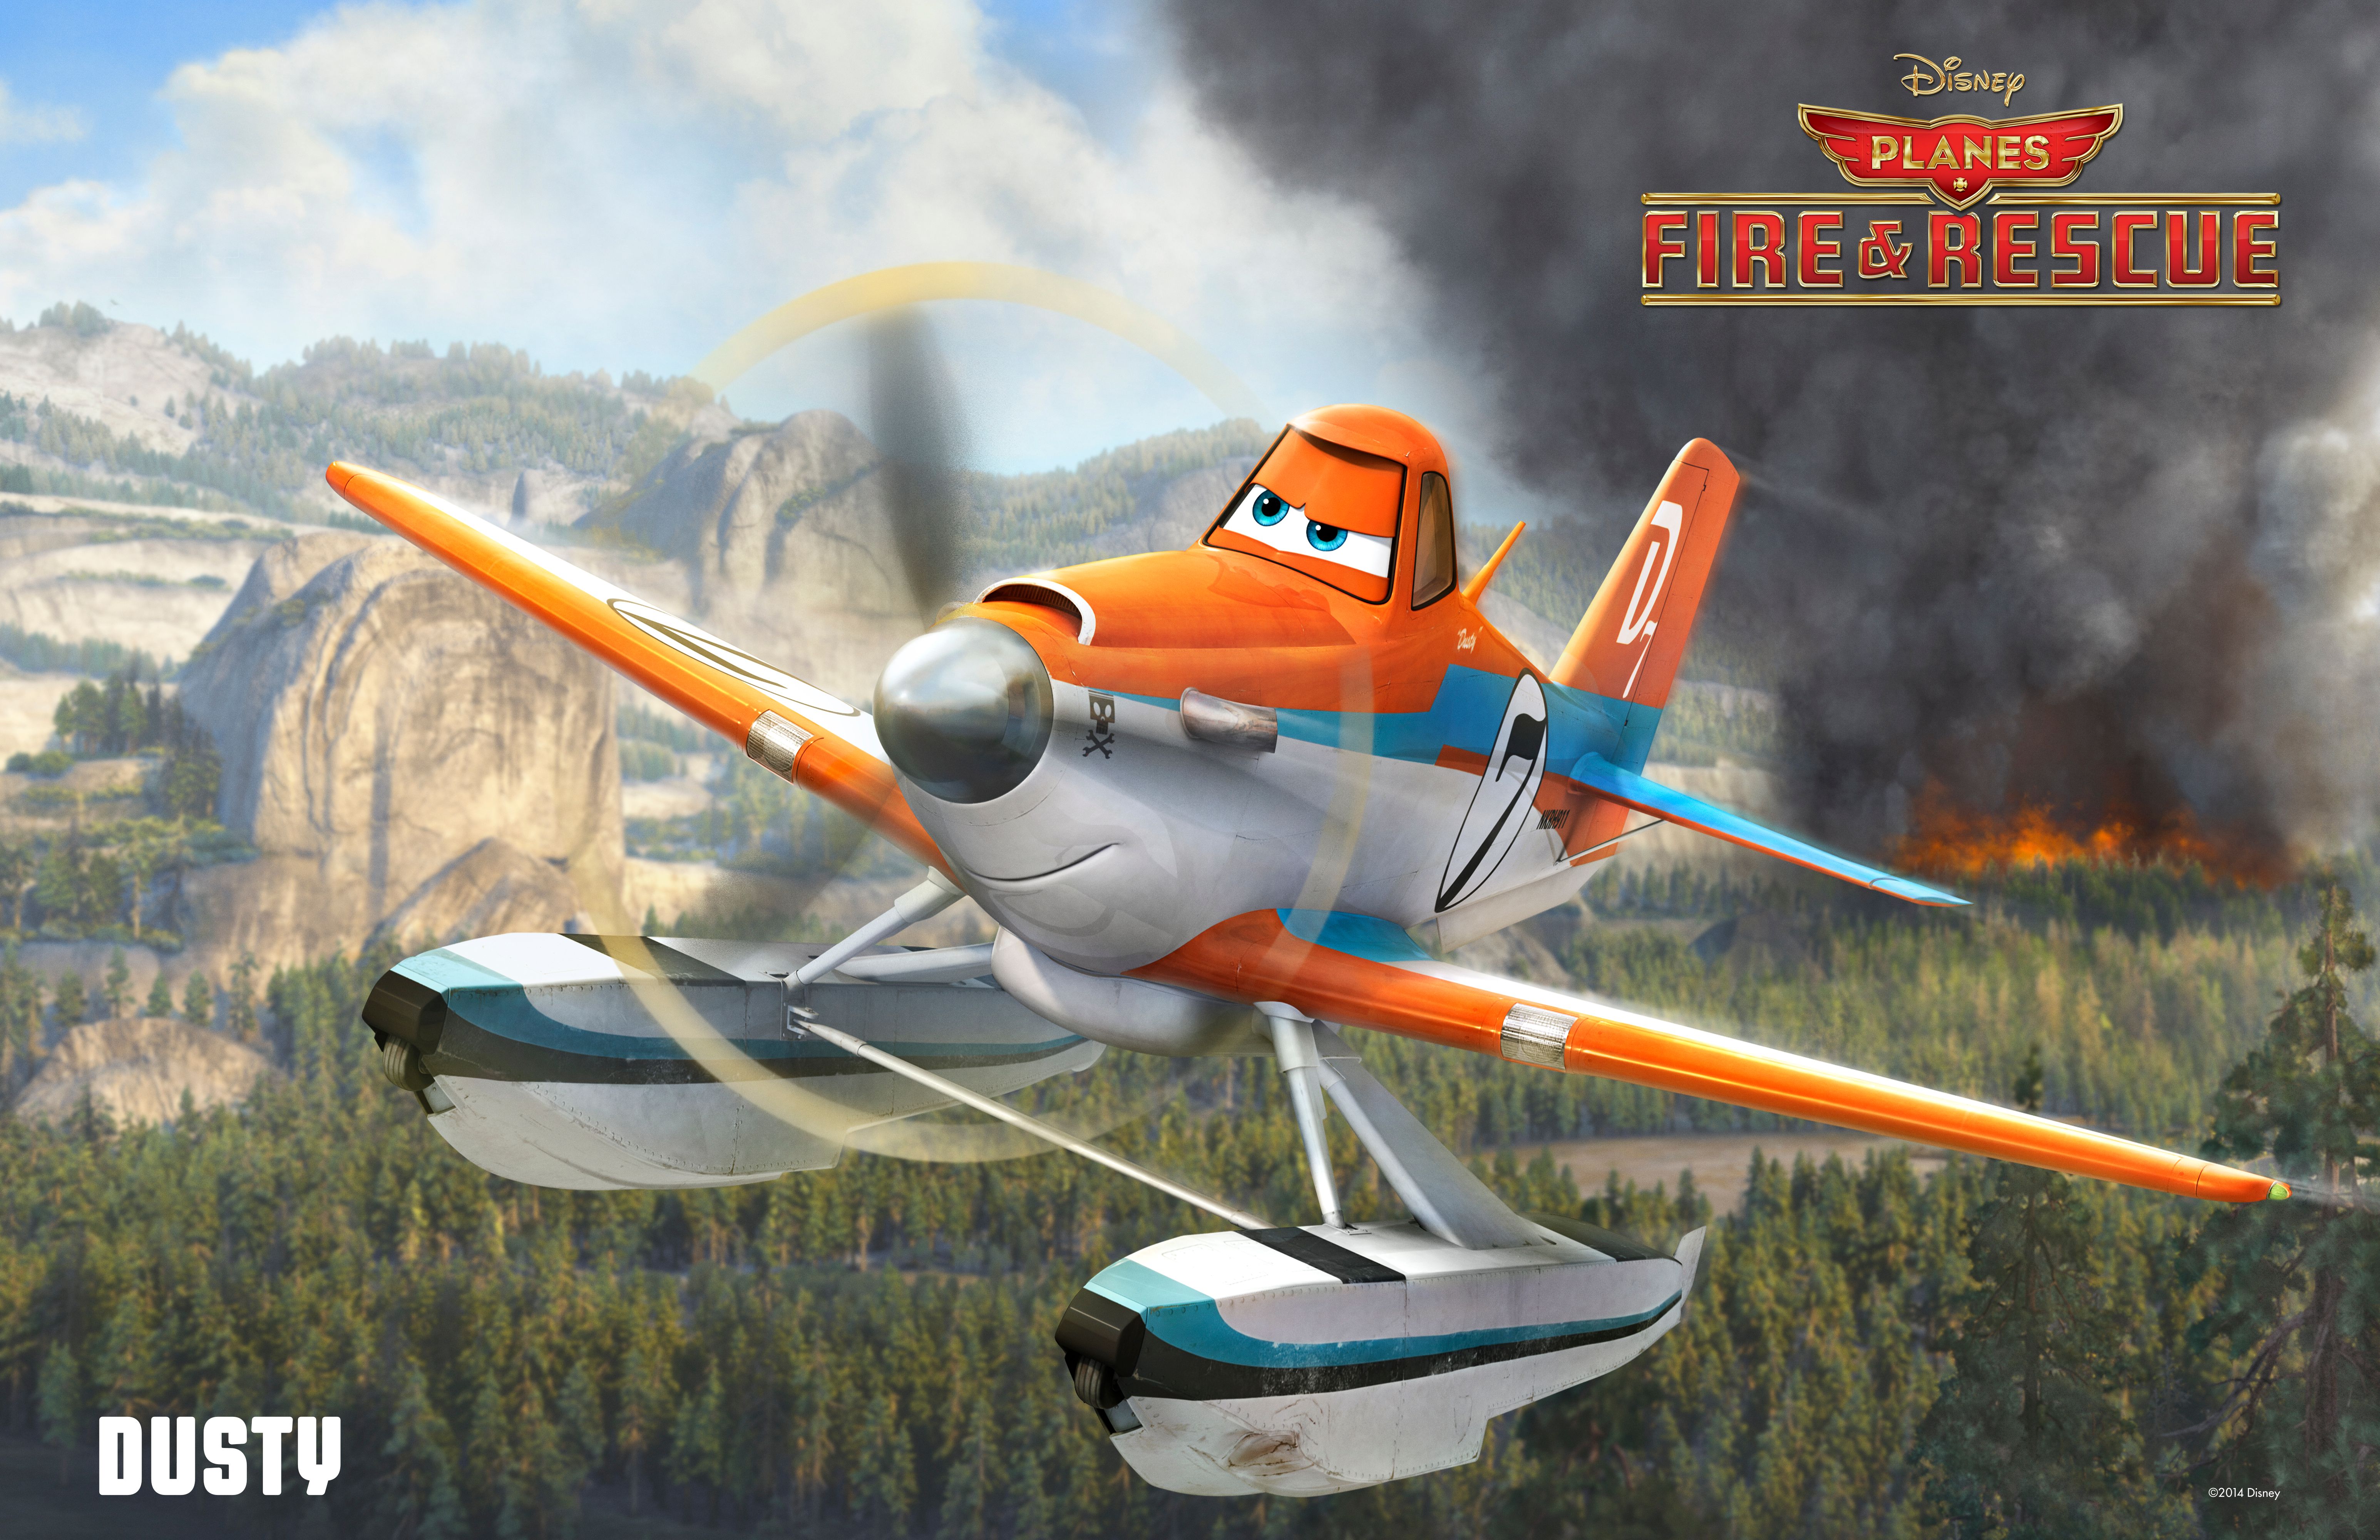 Planes Fire and Rescue Dusty Poster